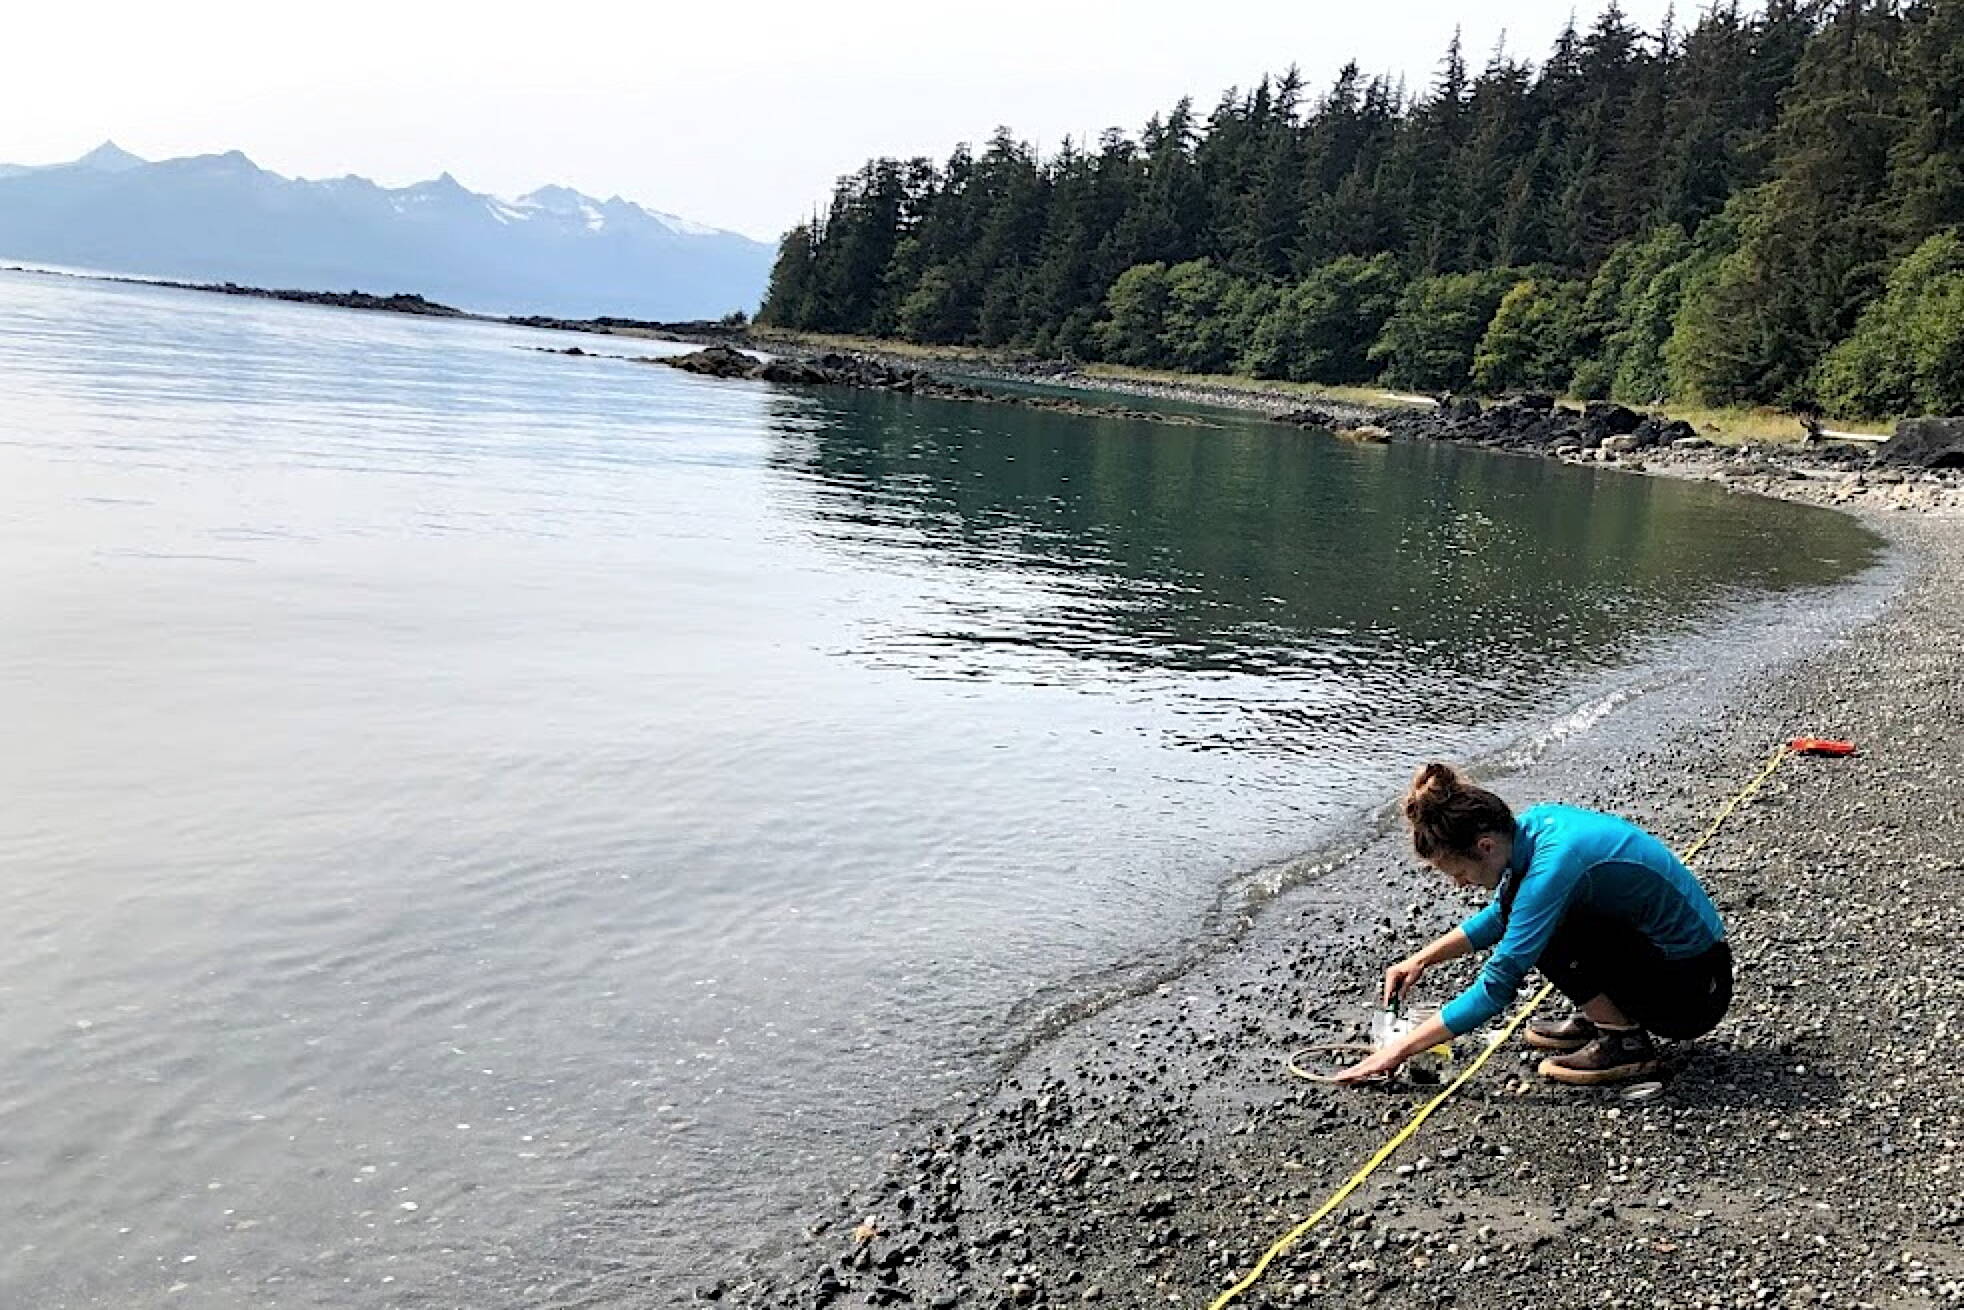 University of Alaska Southeast graduate student Muriel Walatka gathers samples of beach sand to examine for microplastics at Auke Recreation Area in August 2019. (Photo courtesy Sonia Nagorski)